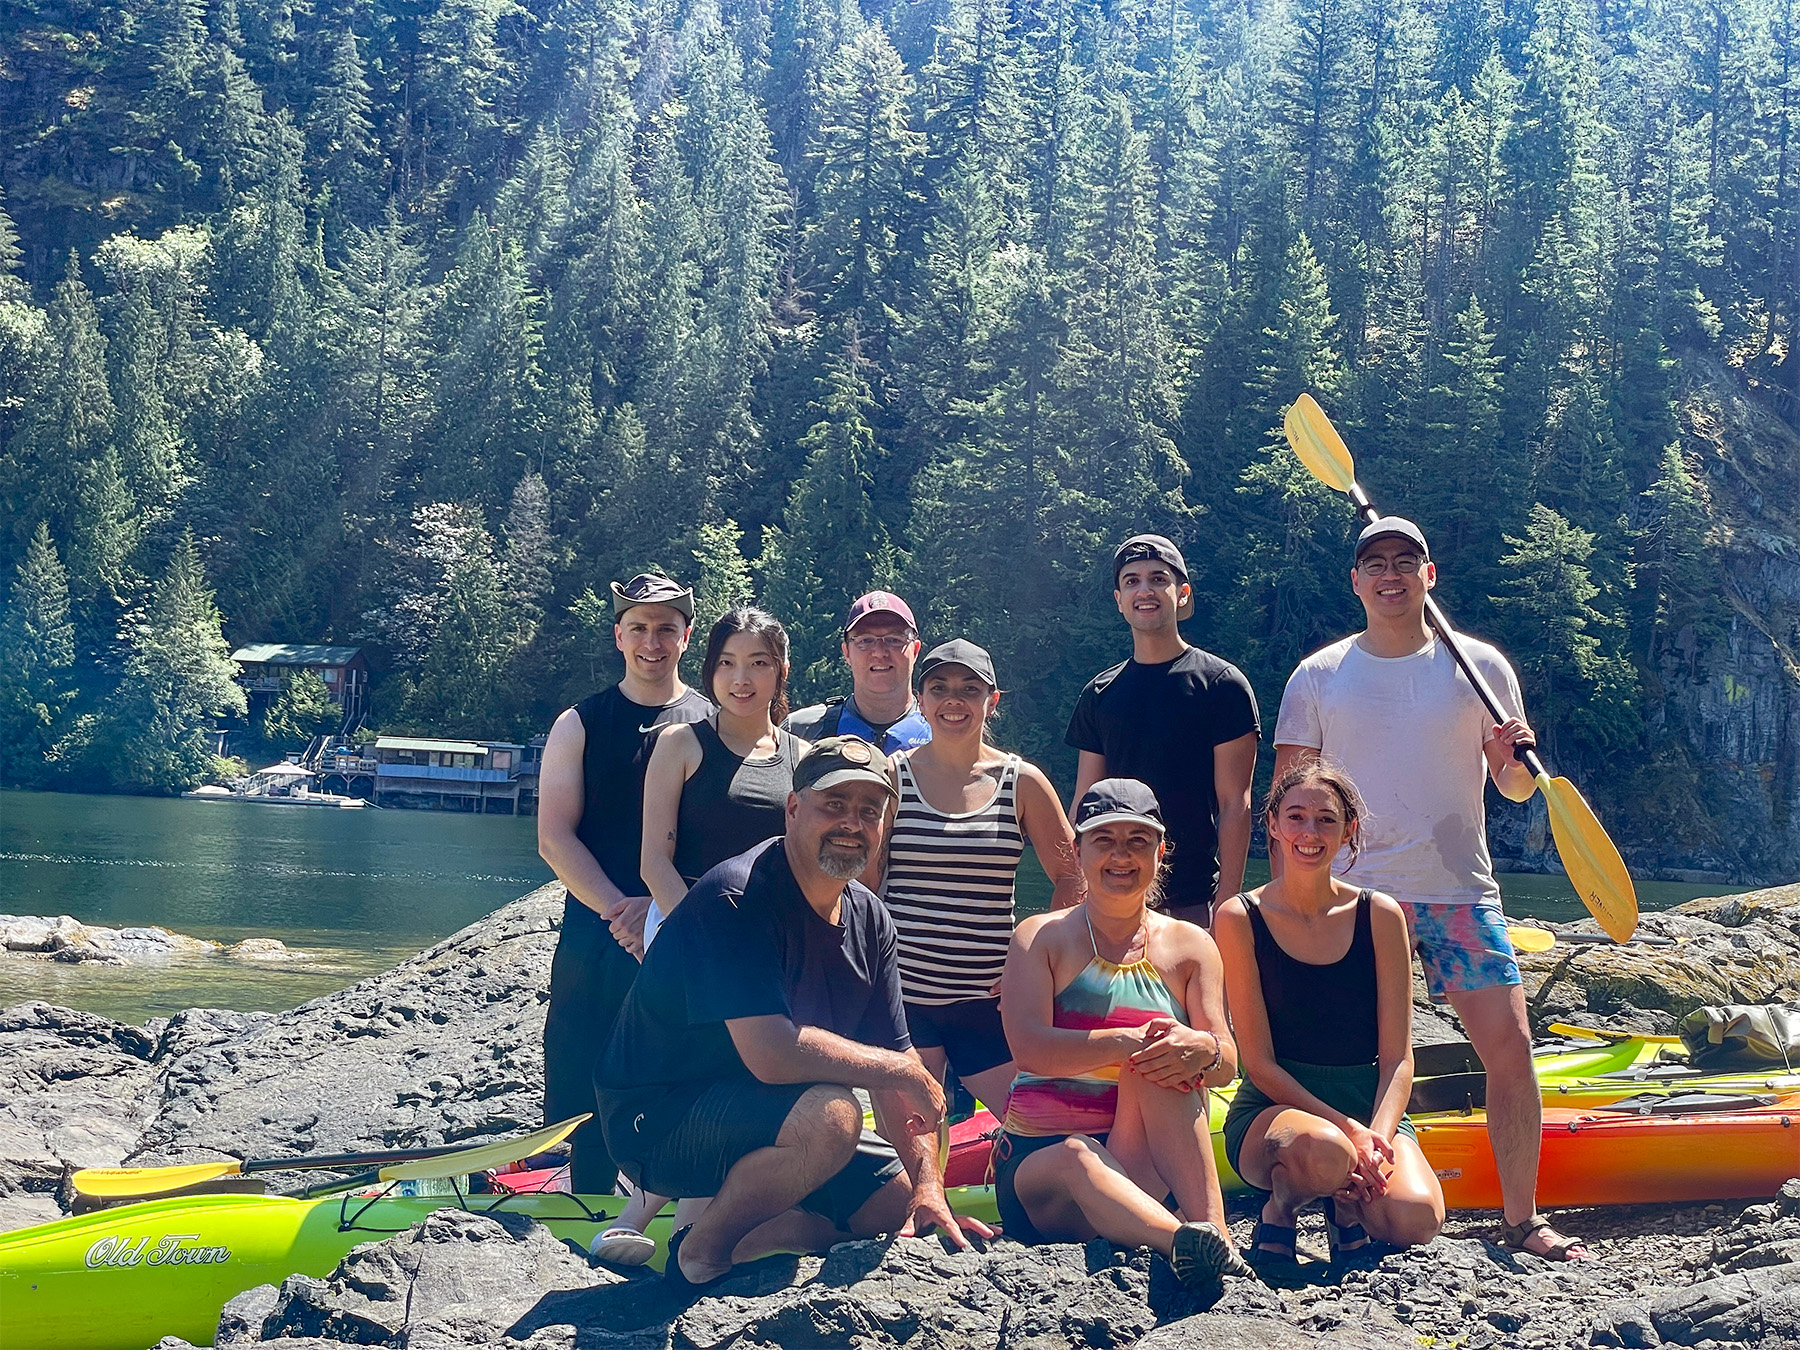 Team photo in front of deep cove with kayaks